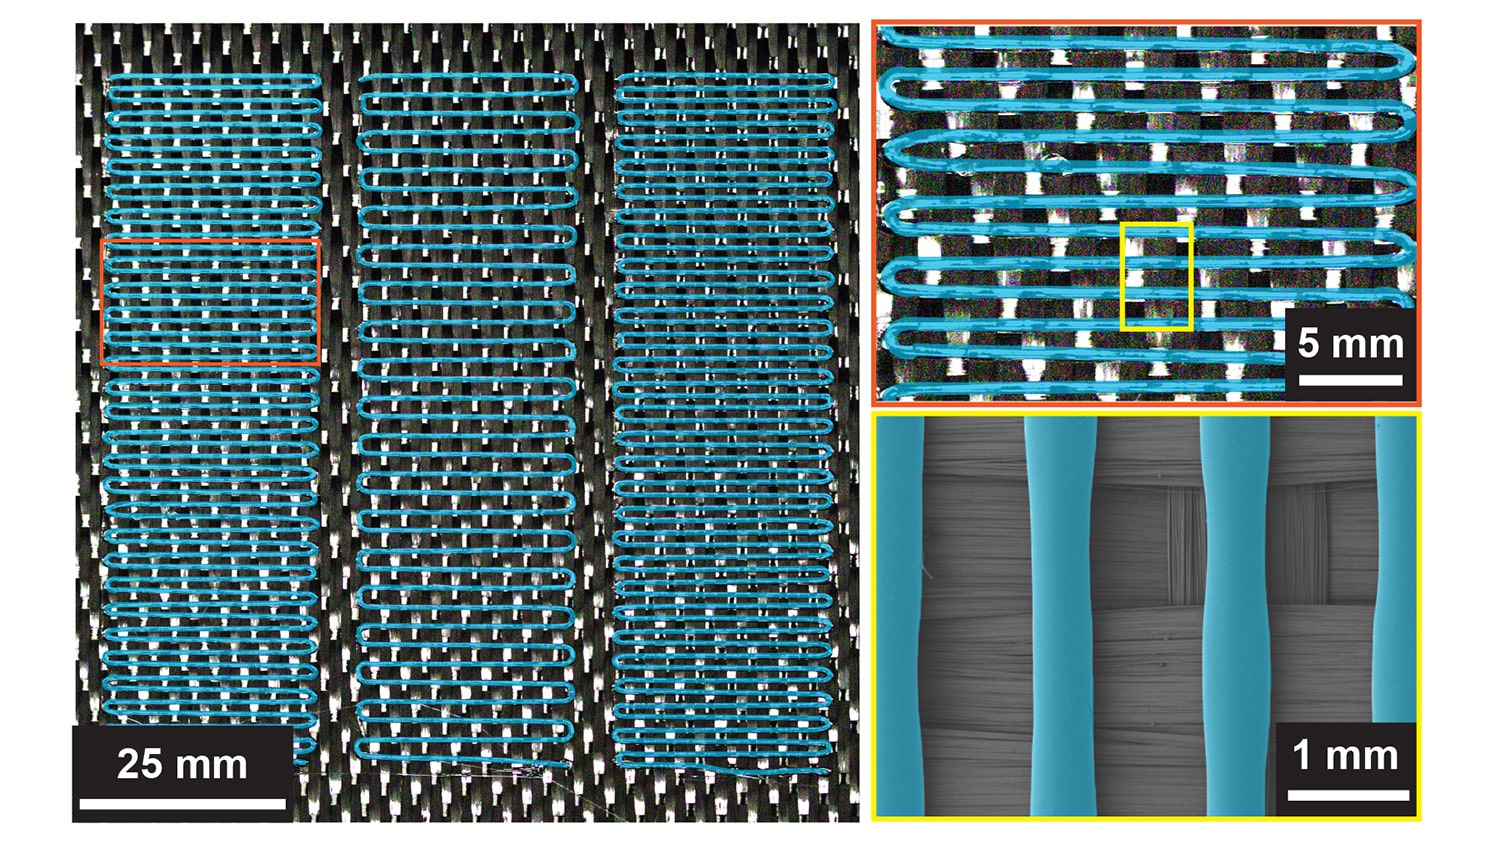 image shows blue piping (thermoplastic) embedded in a black carbon fiber mesh